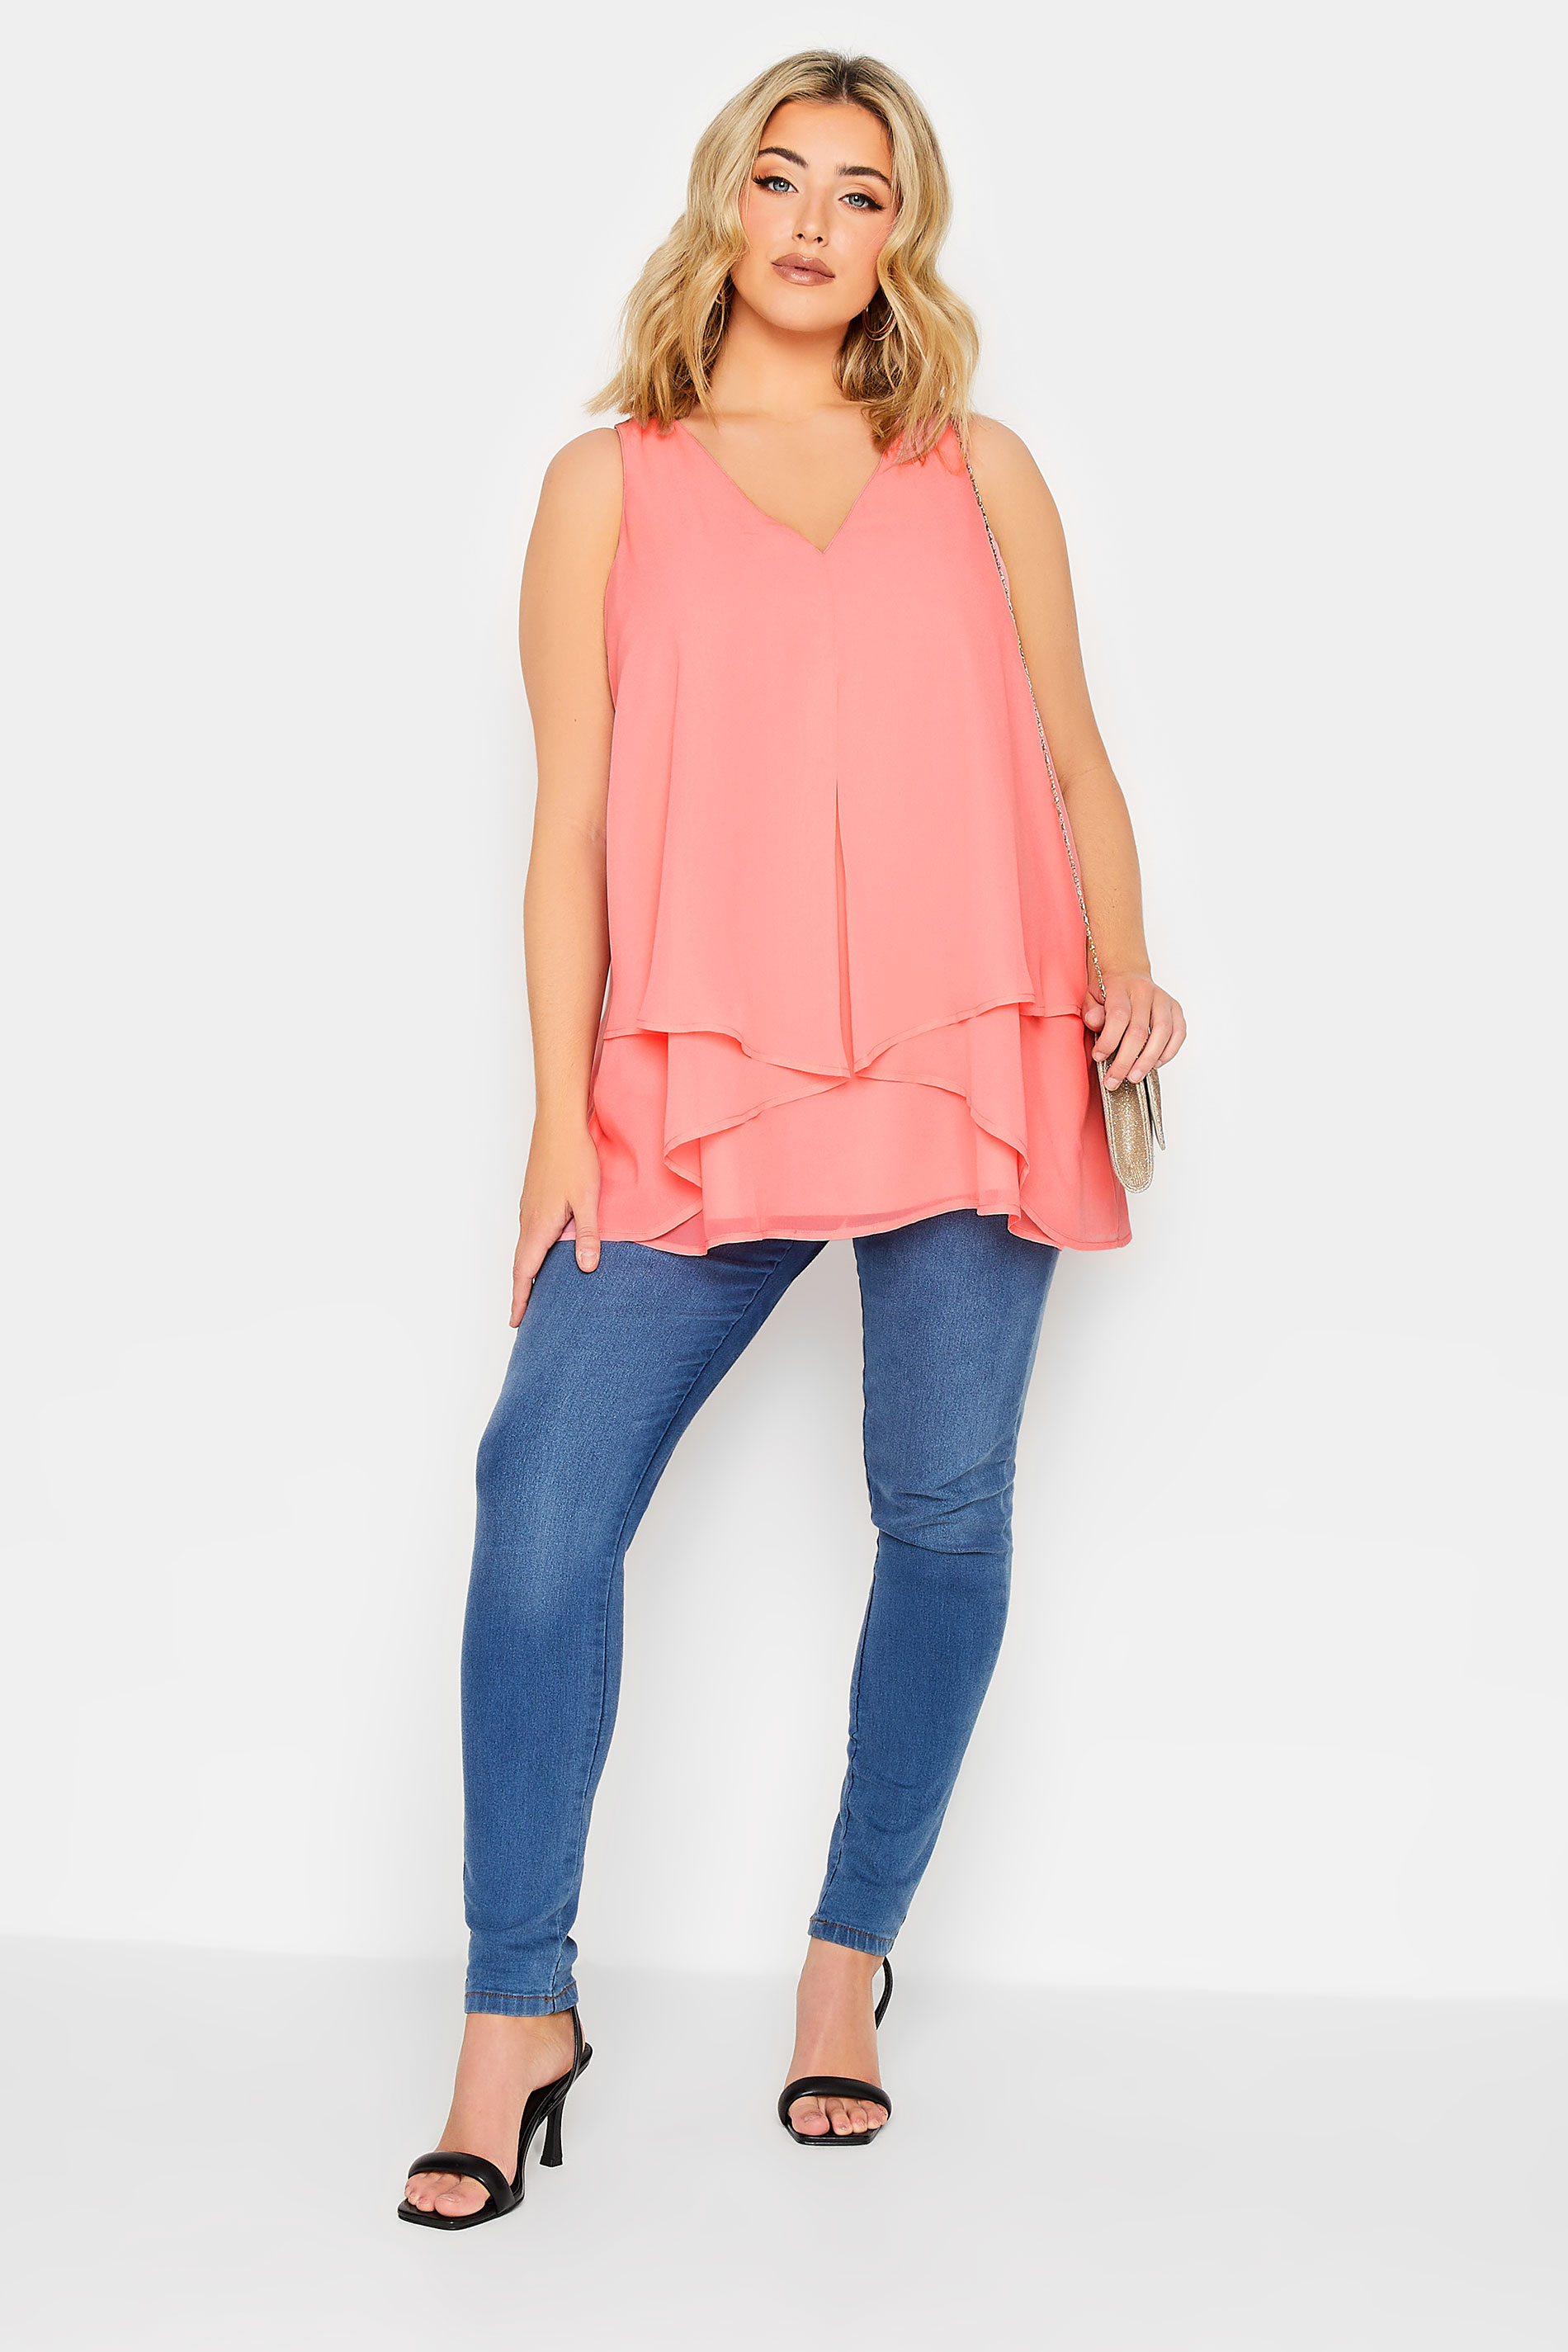 YOURS LONDON Plus Size Pink Layered Vest Top | Yours Clothing 2